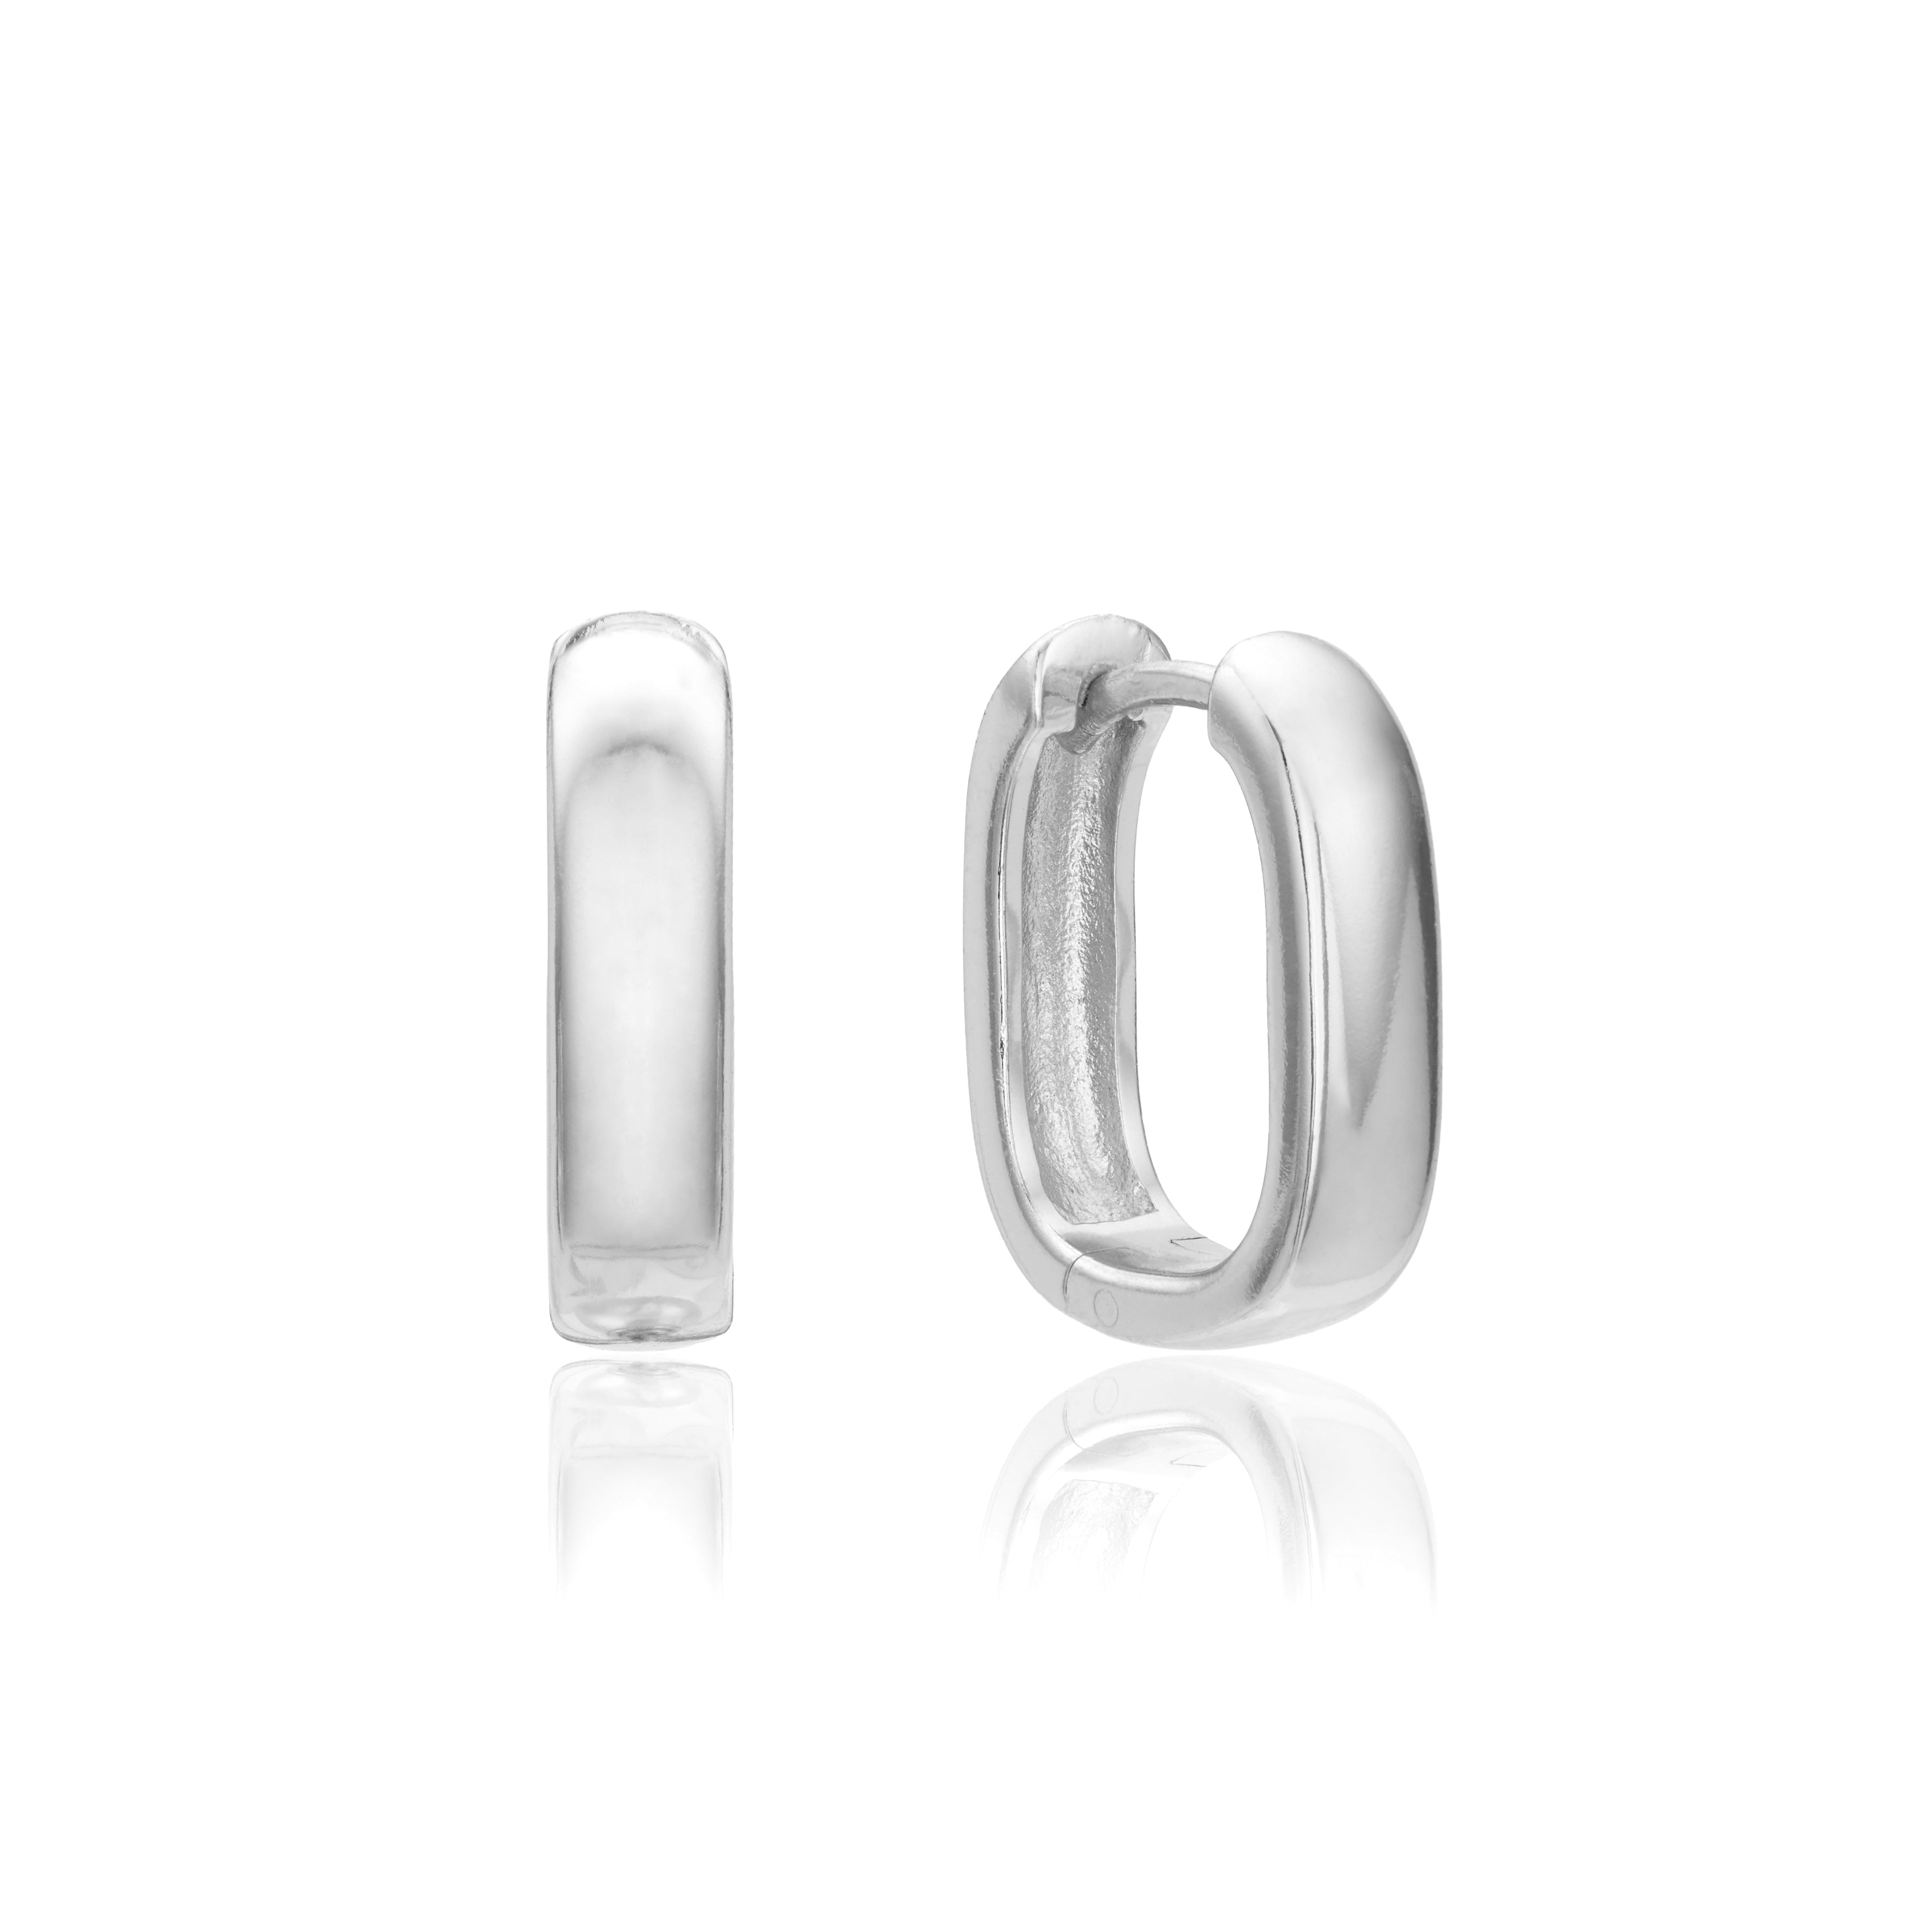 Silver thick squared hoop earrings on a white background